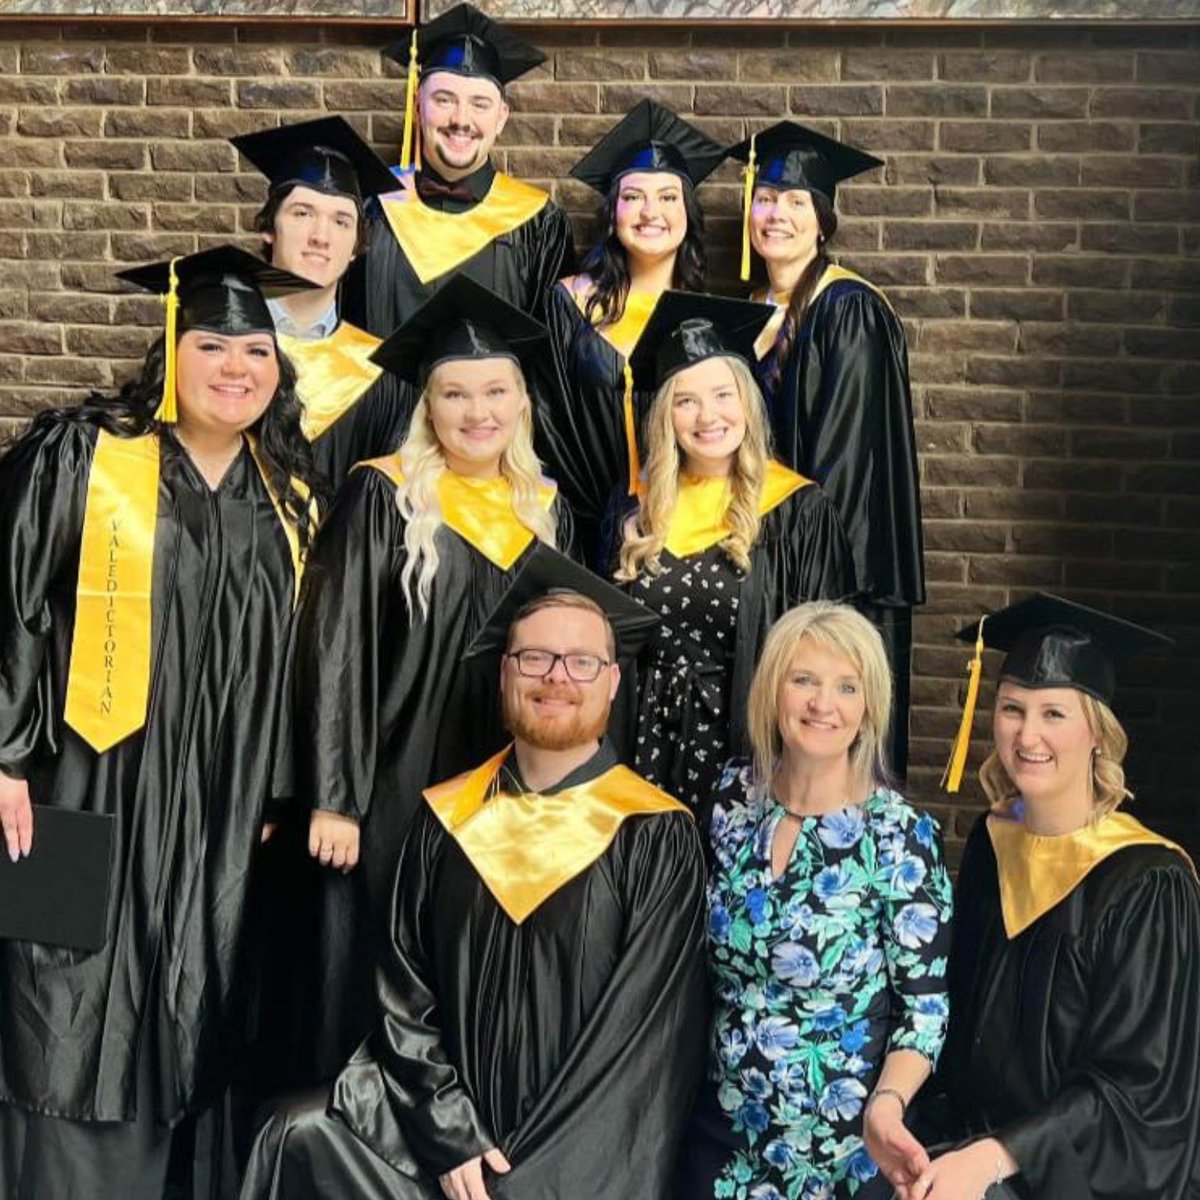 Congratulations to these sweet Therapeutic Recreation graduates, pictured here with their instructor Joanne! We are so proud of you all and can't wait to see the ways you will use your new skills and kind hearts in the recreation field 🎓💛

#ACGrad2024 #TherapeuticRecreation